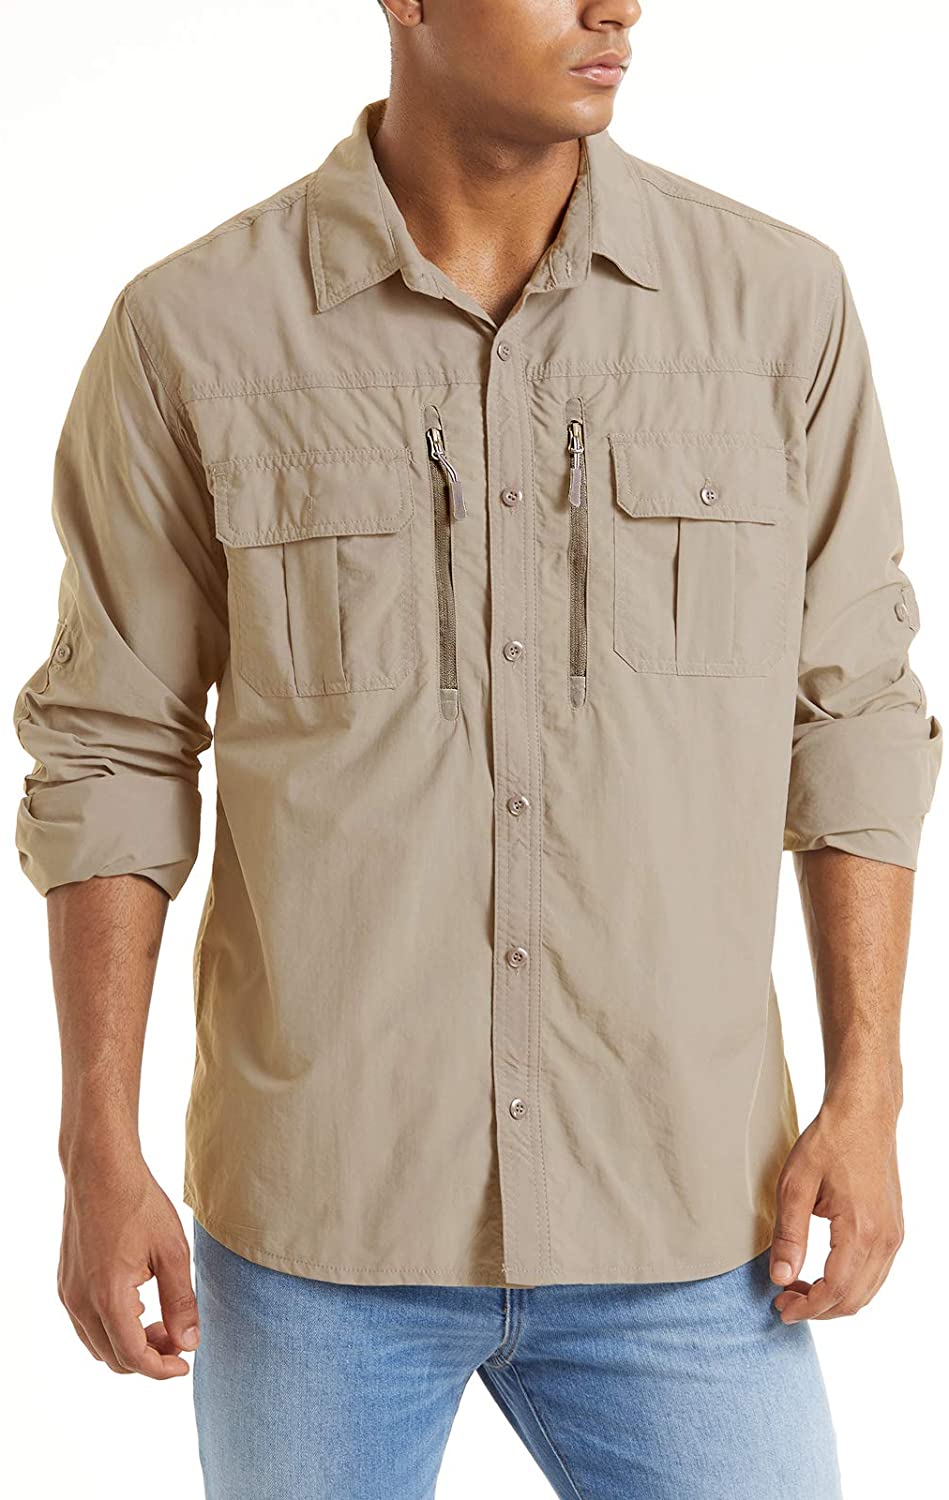  TACVASEN Men's Tactical Shirts Quick Dry UV Protection